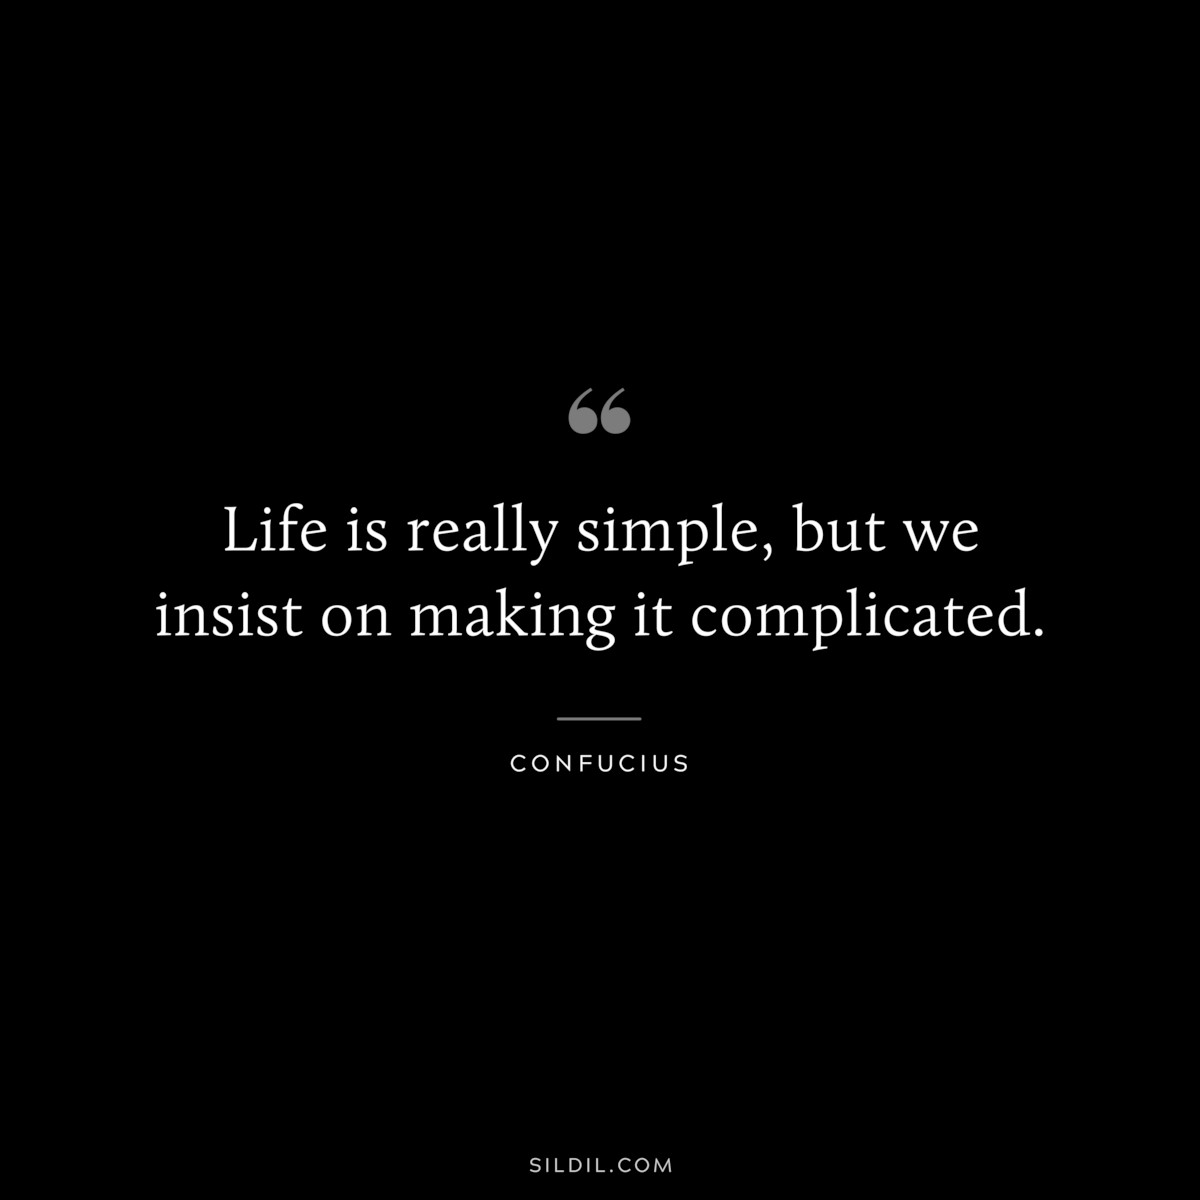 Life is really simple, but we insist on making it complicated. ― Confucius